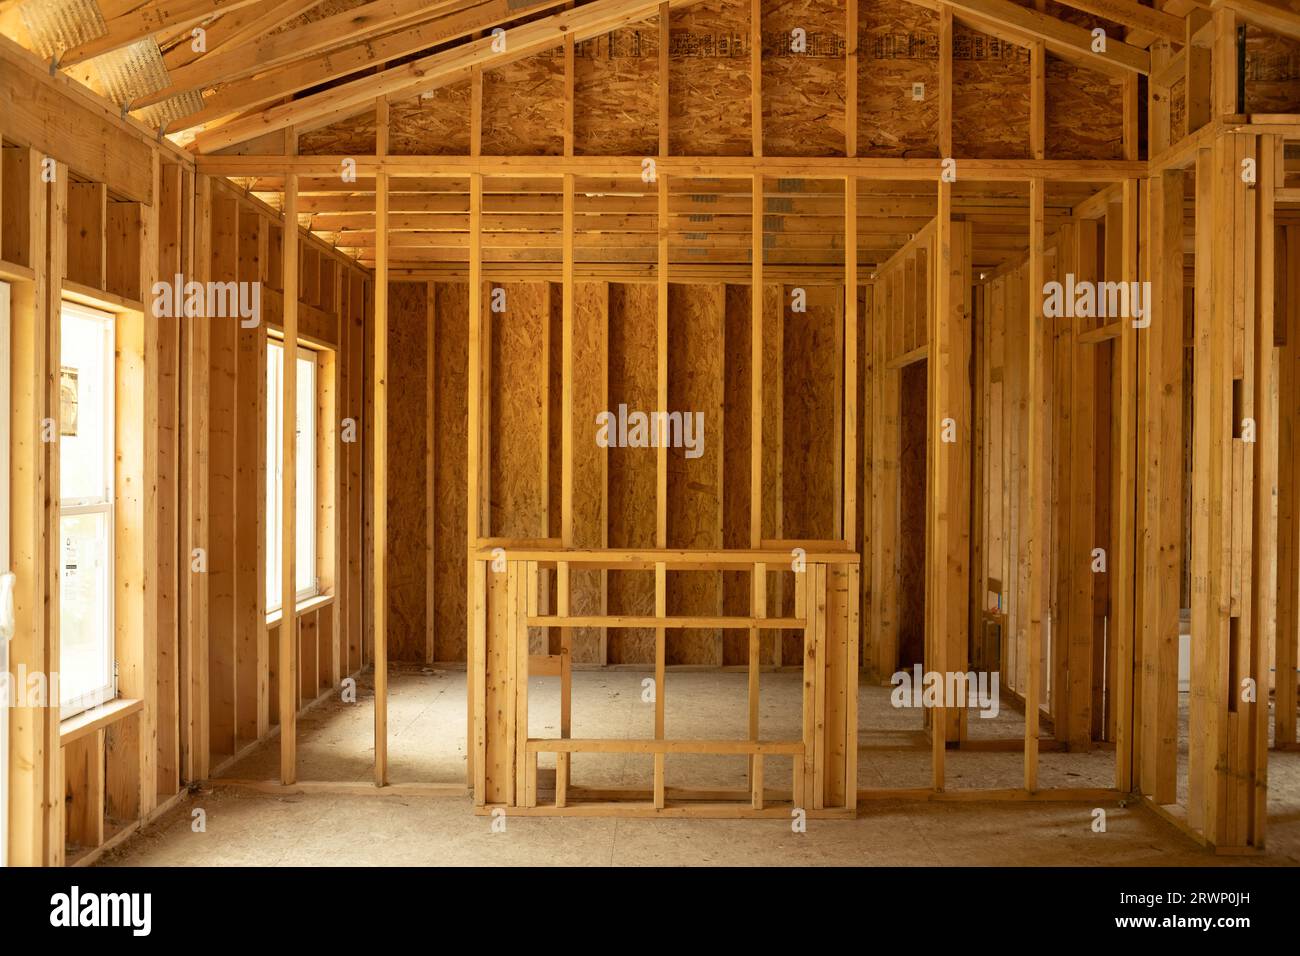 Interior view of a residential home under construction Stock Photo